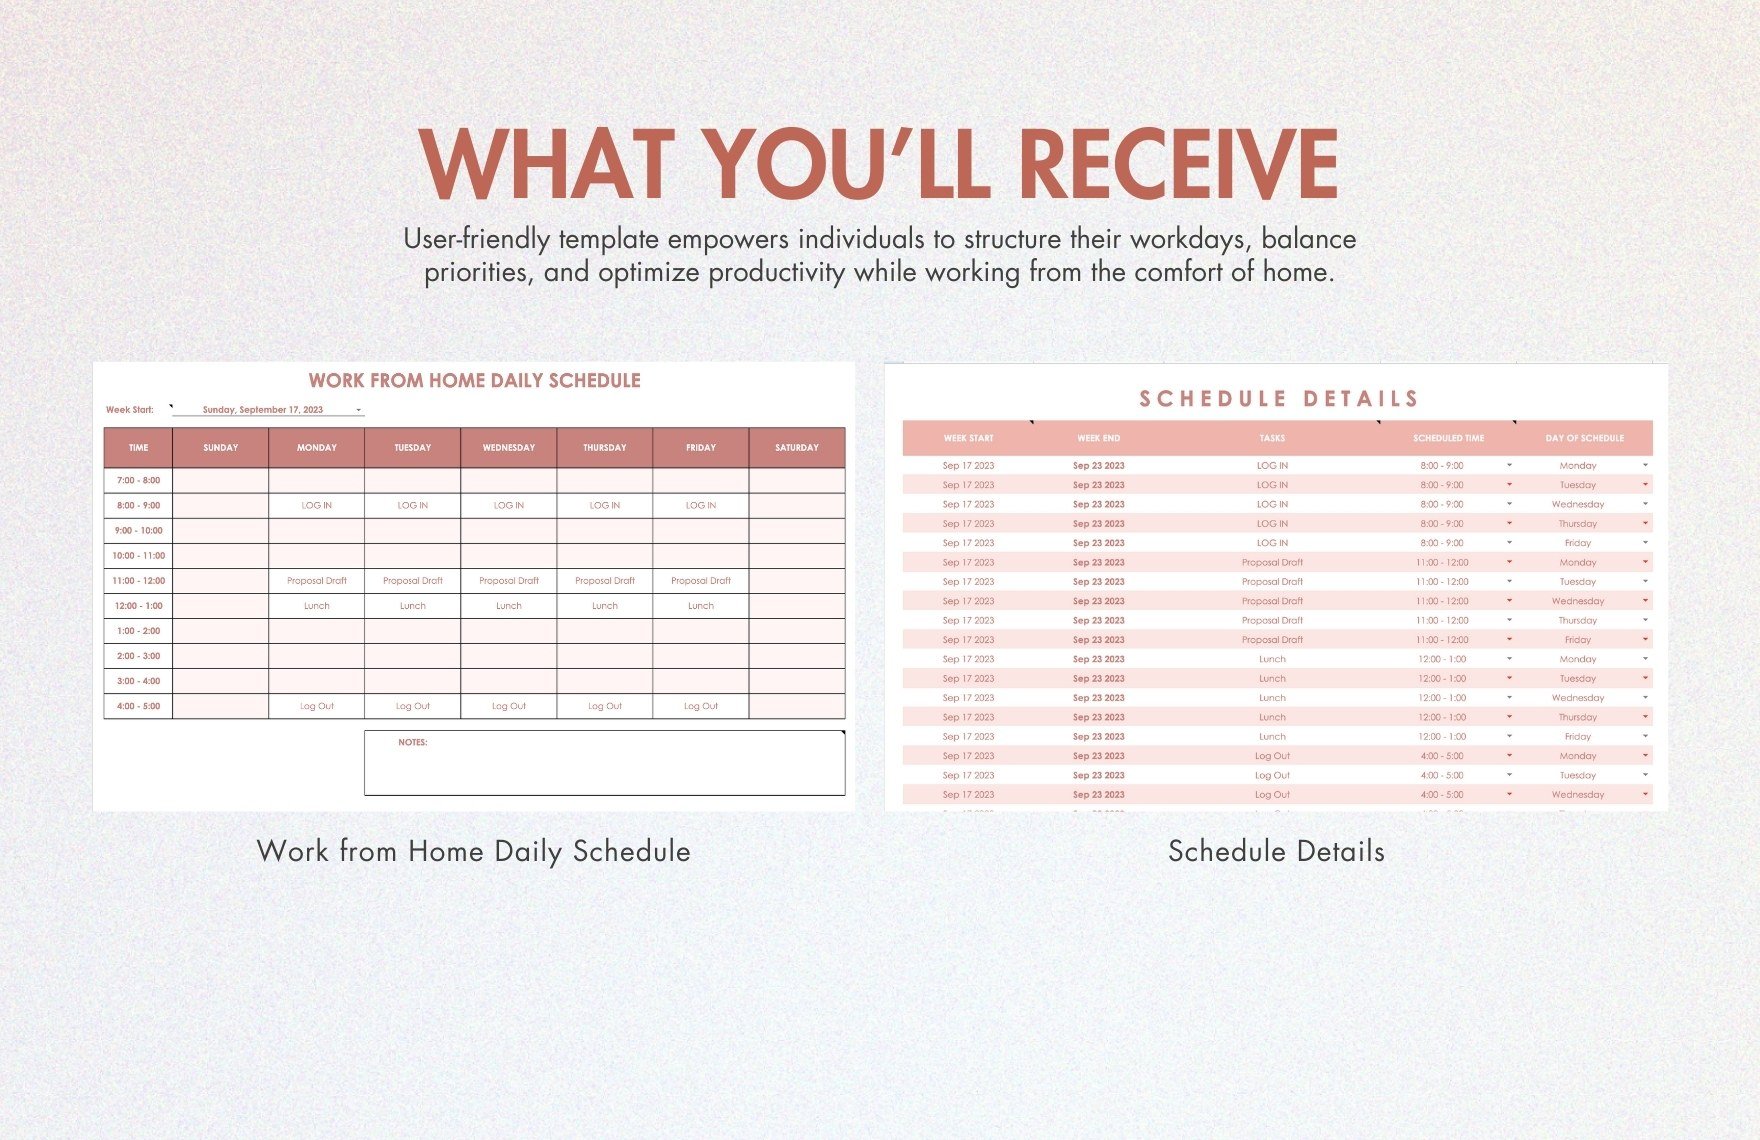 Work From Home Daily Schedule Template